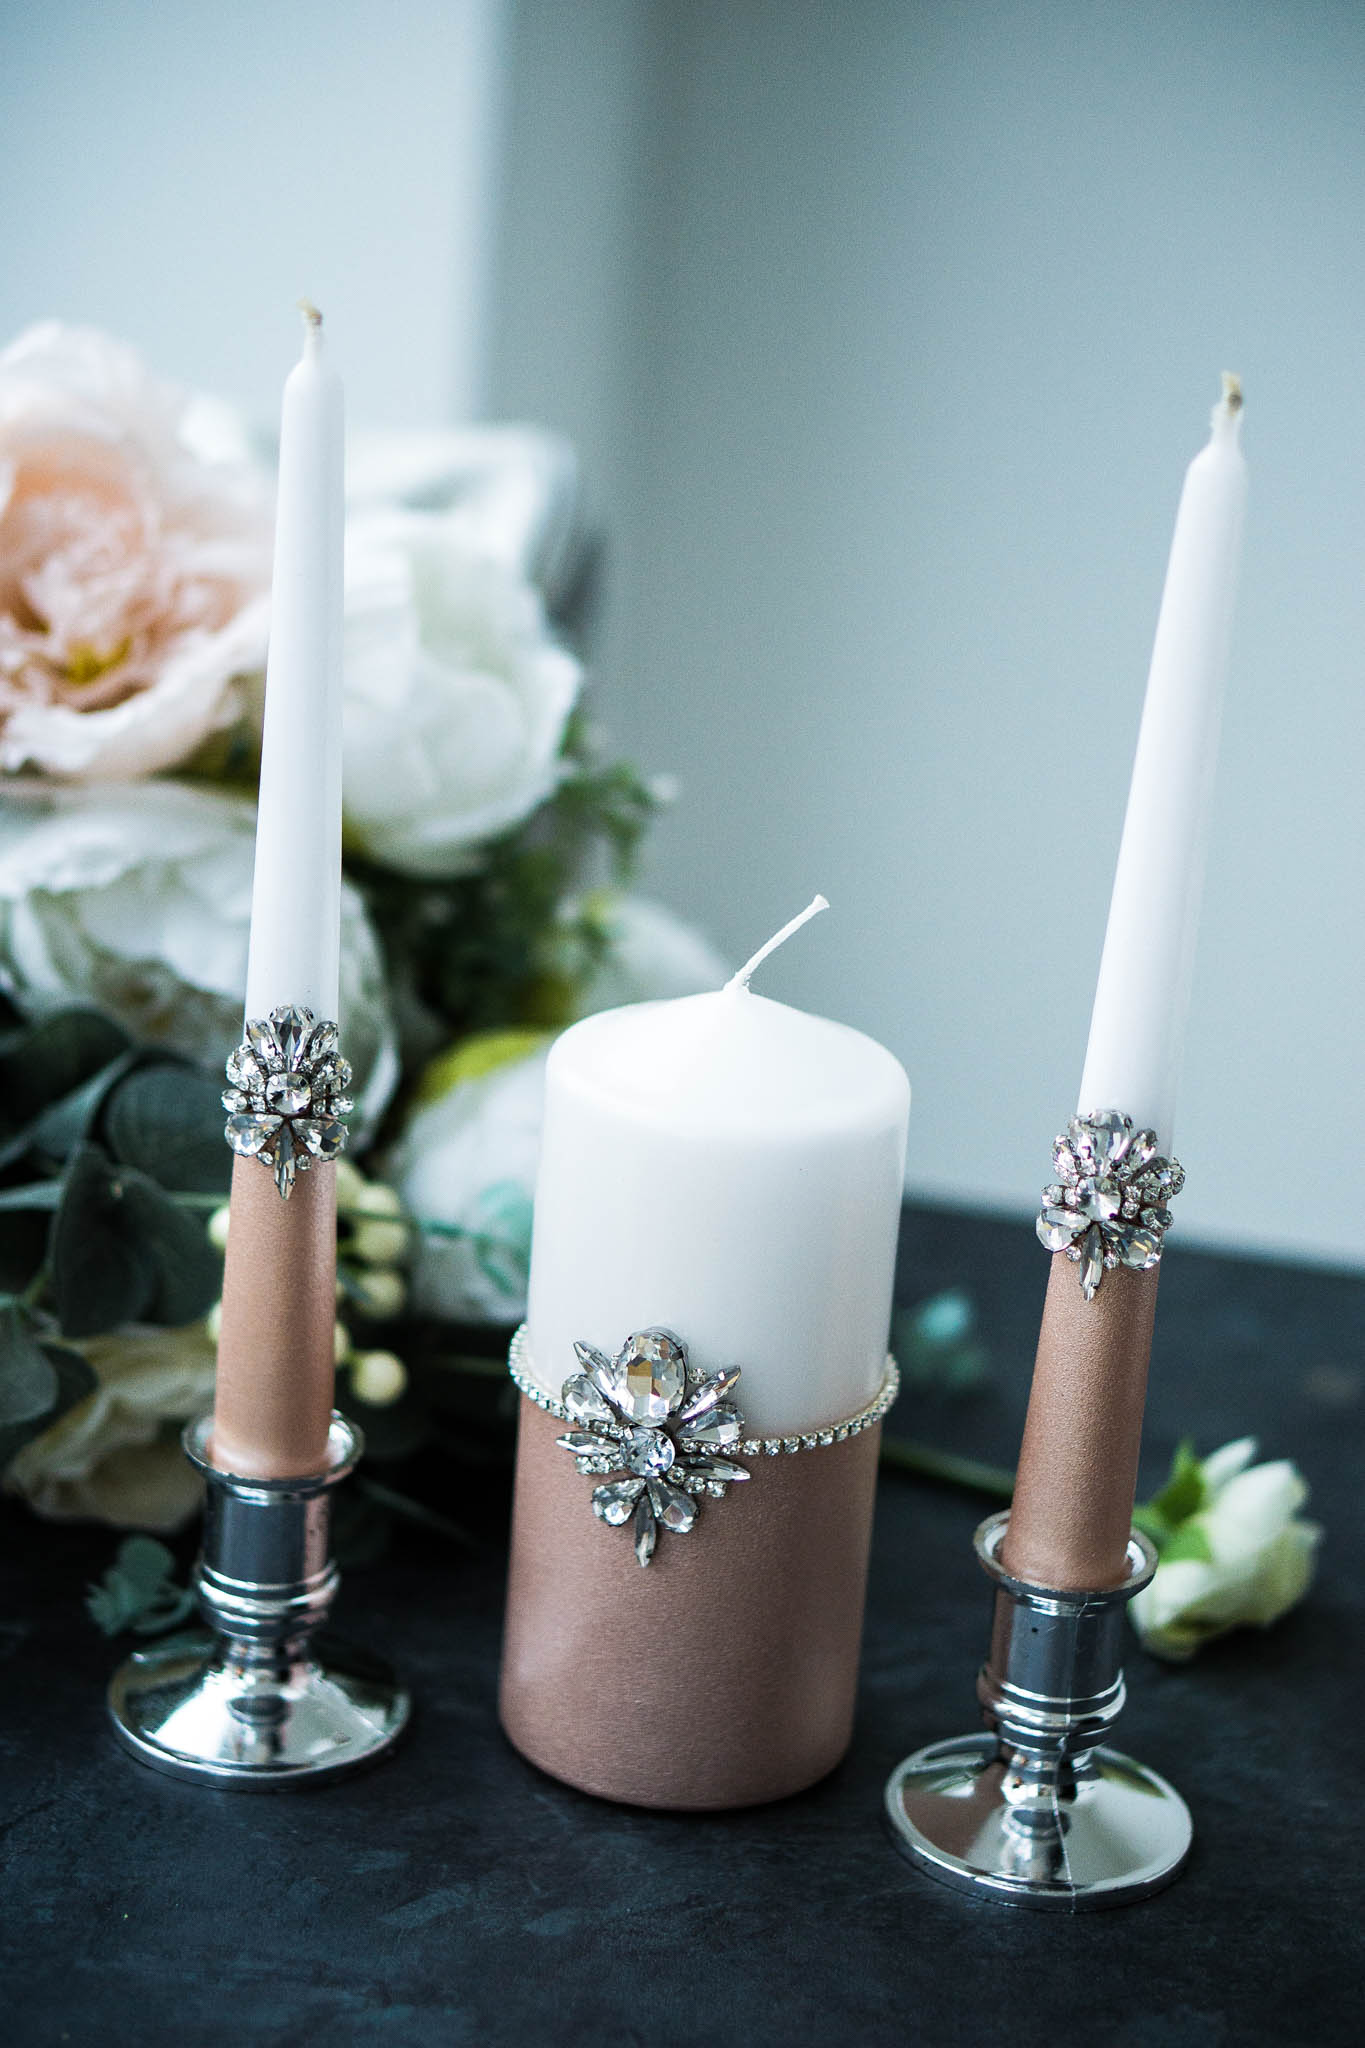 Custom-engraved unity candle set from the luxurious Amanda Collection